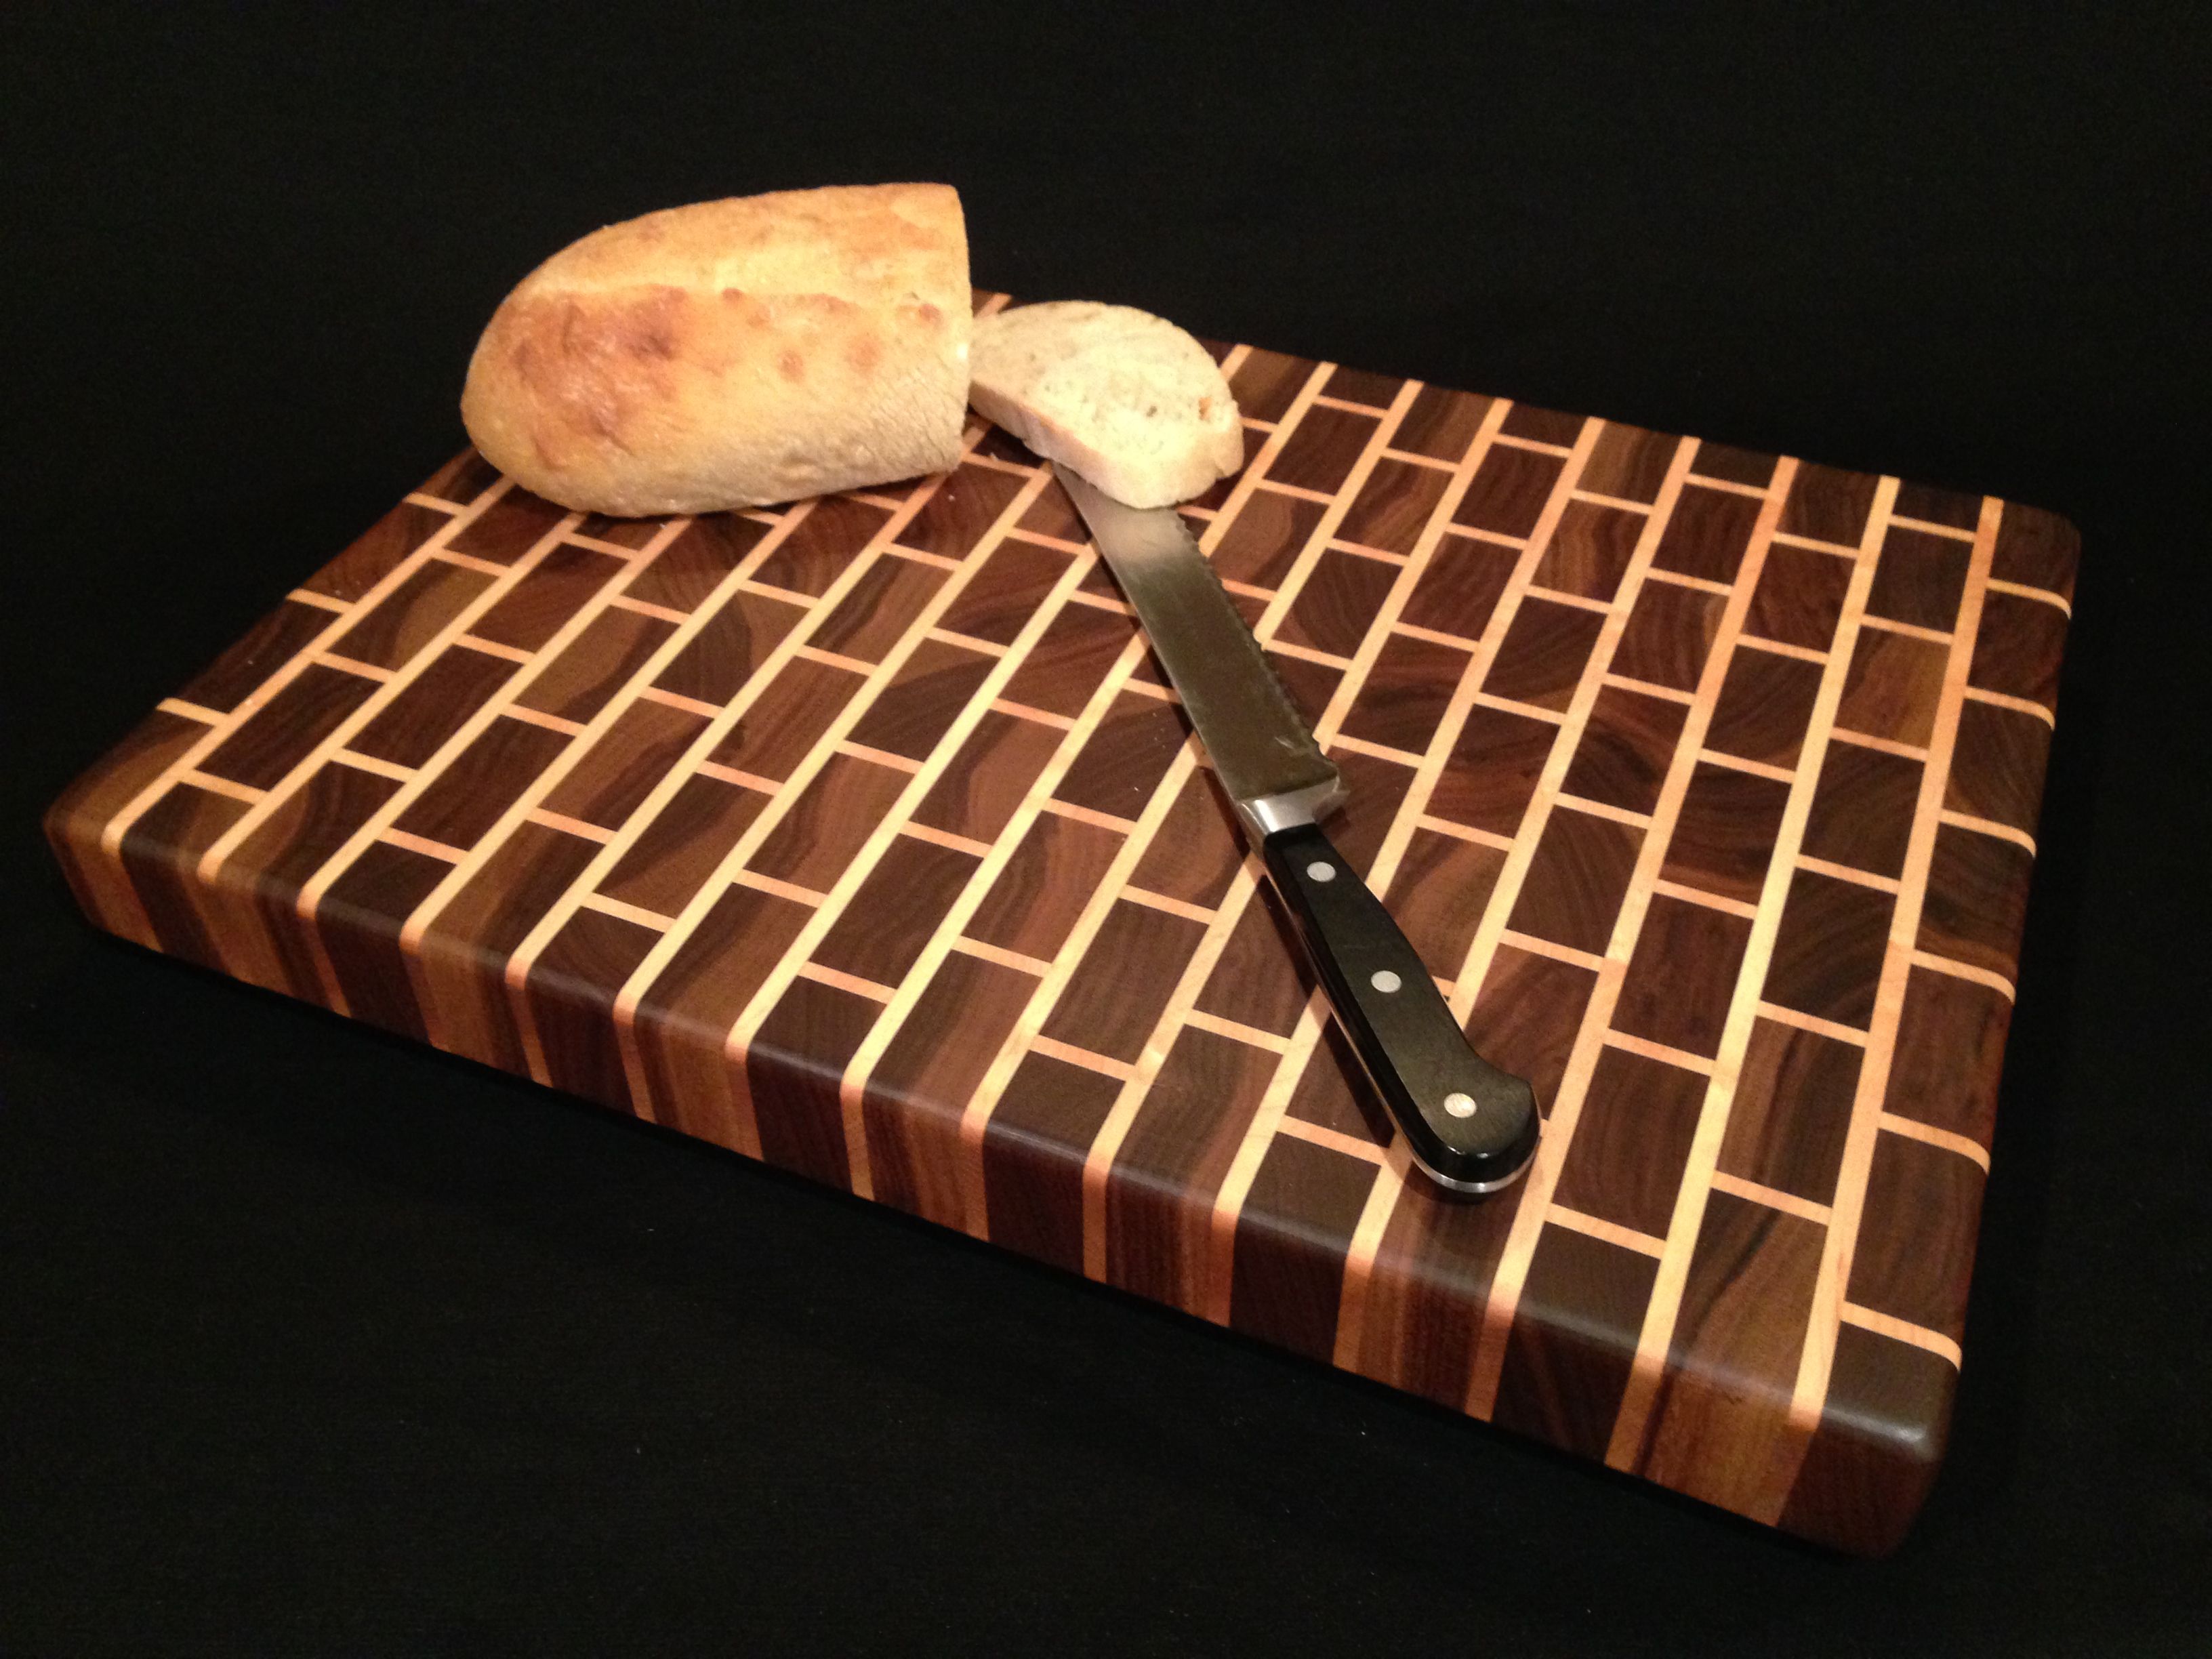 Buy Hand Crafted Black Walnut And Rock Maple End Grain Cutting Board Made To Order From 